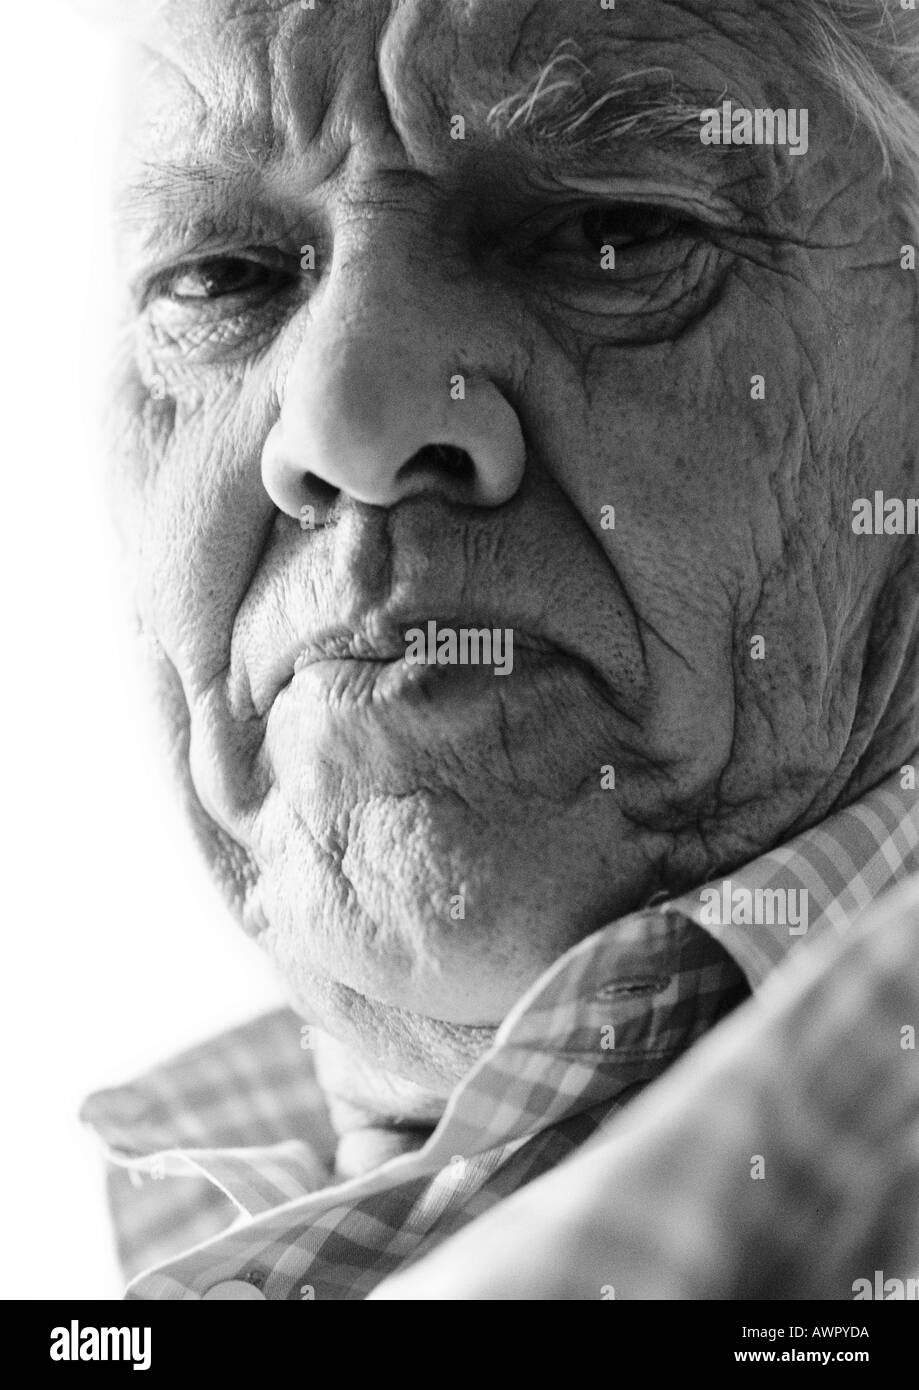 Elderly man frowning at camera, close-up, portrait, b&w Stock Photo